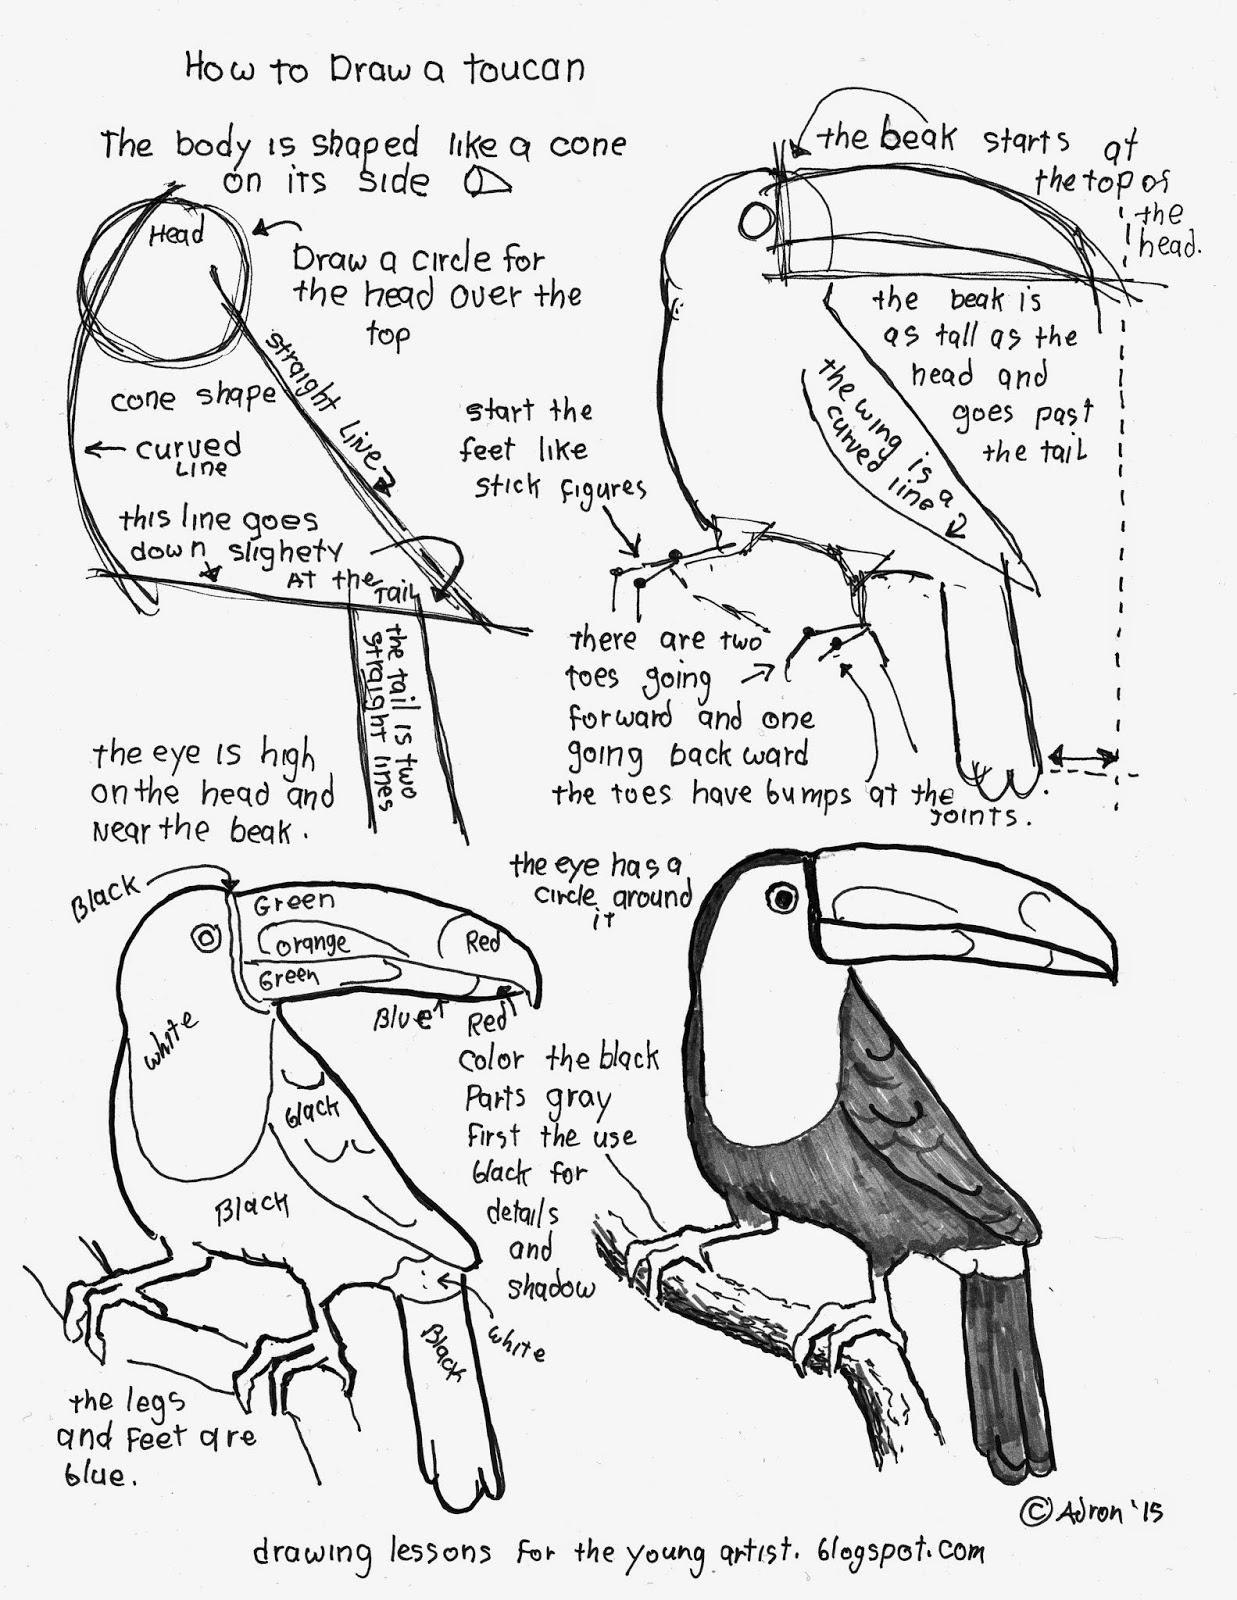 Best How To Draw A Toucan in the world Don t miss out 